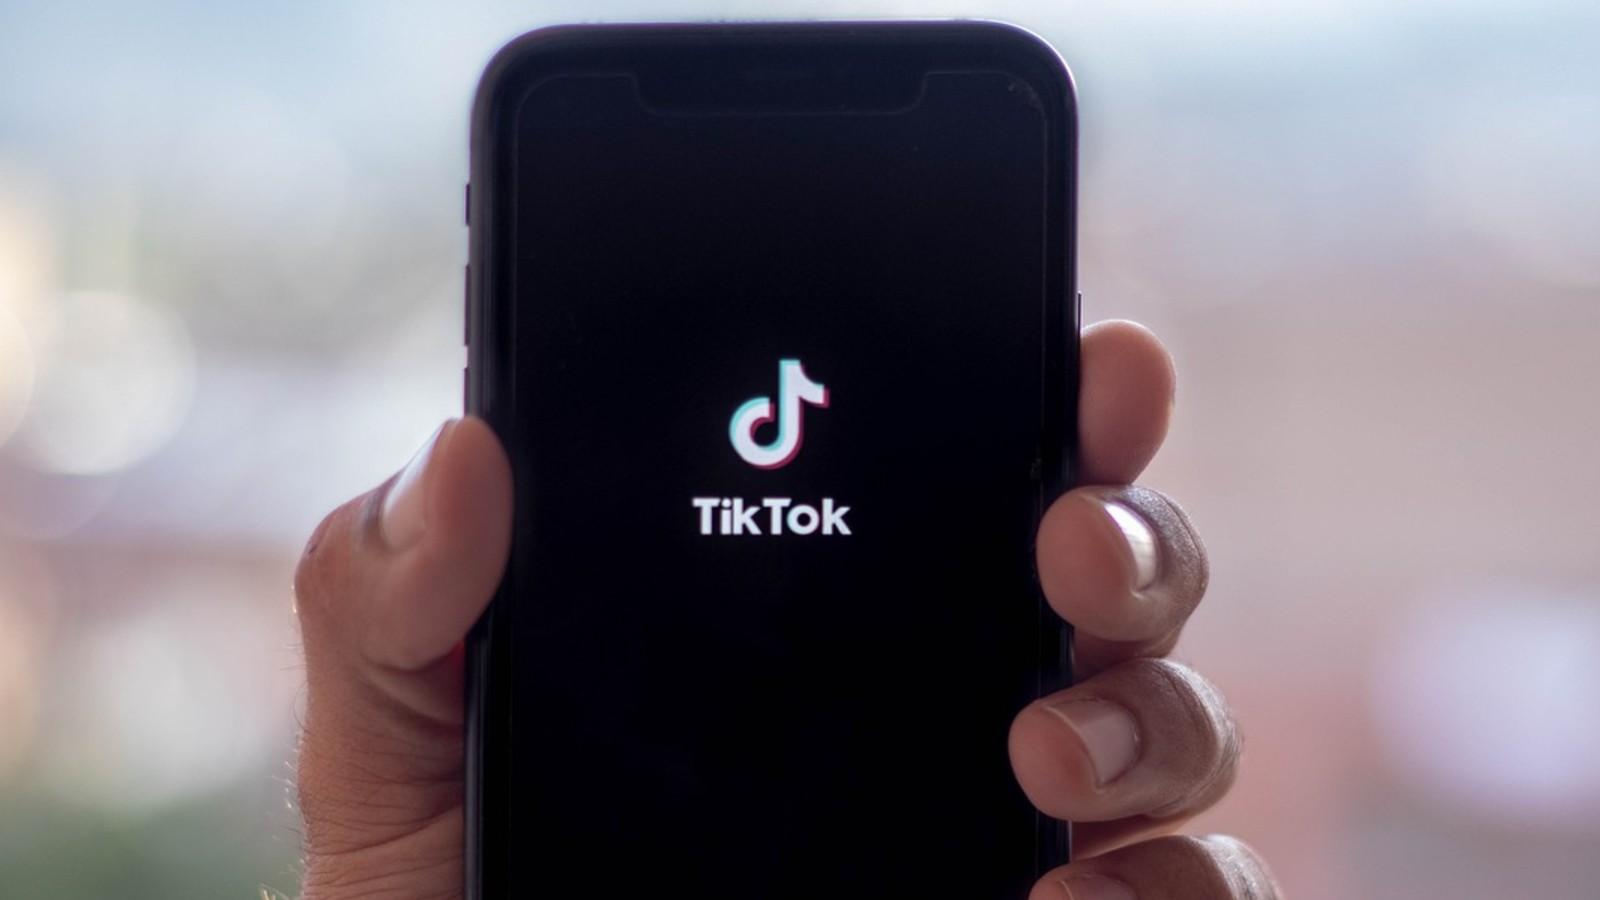 The TikTok launch screen phone held by a hand